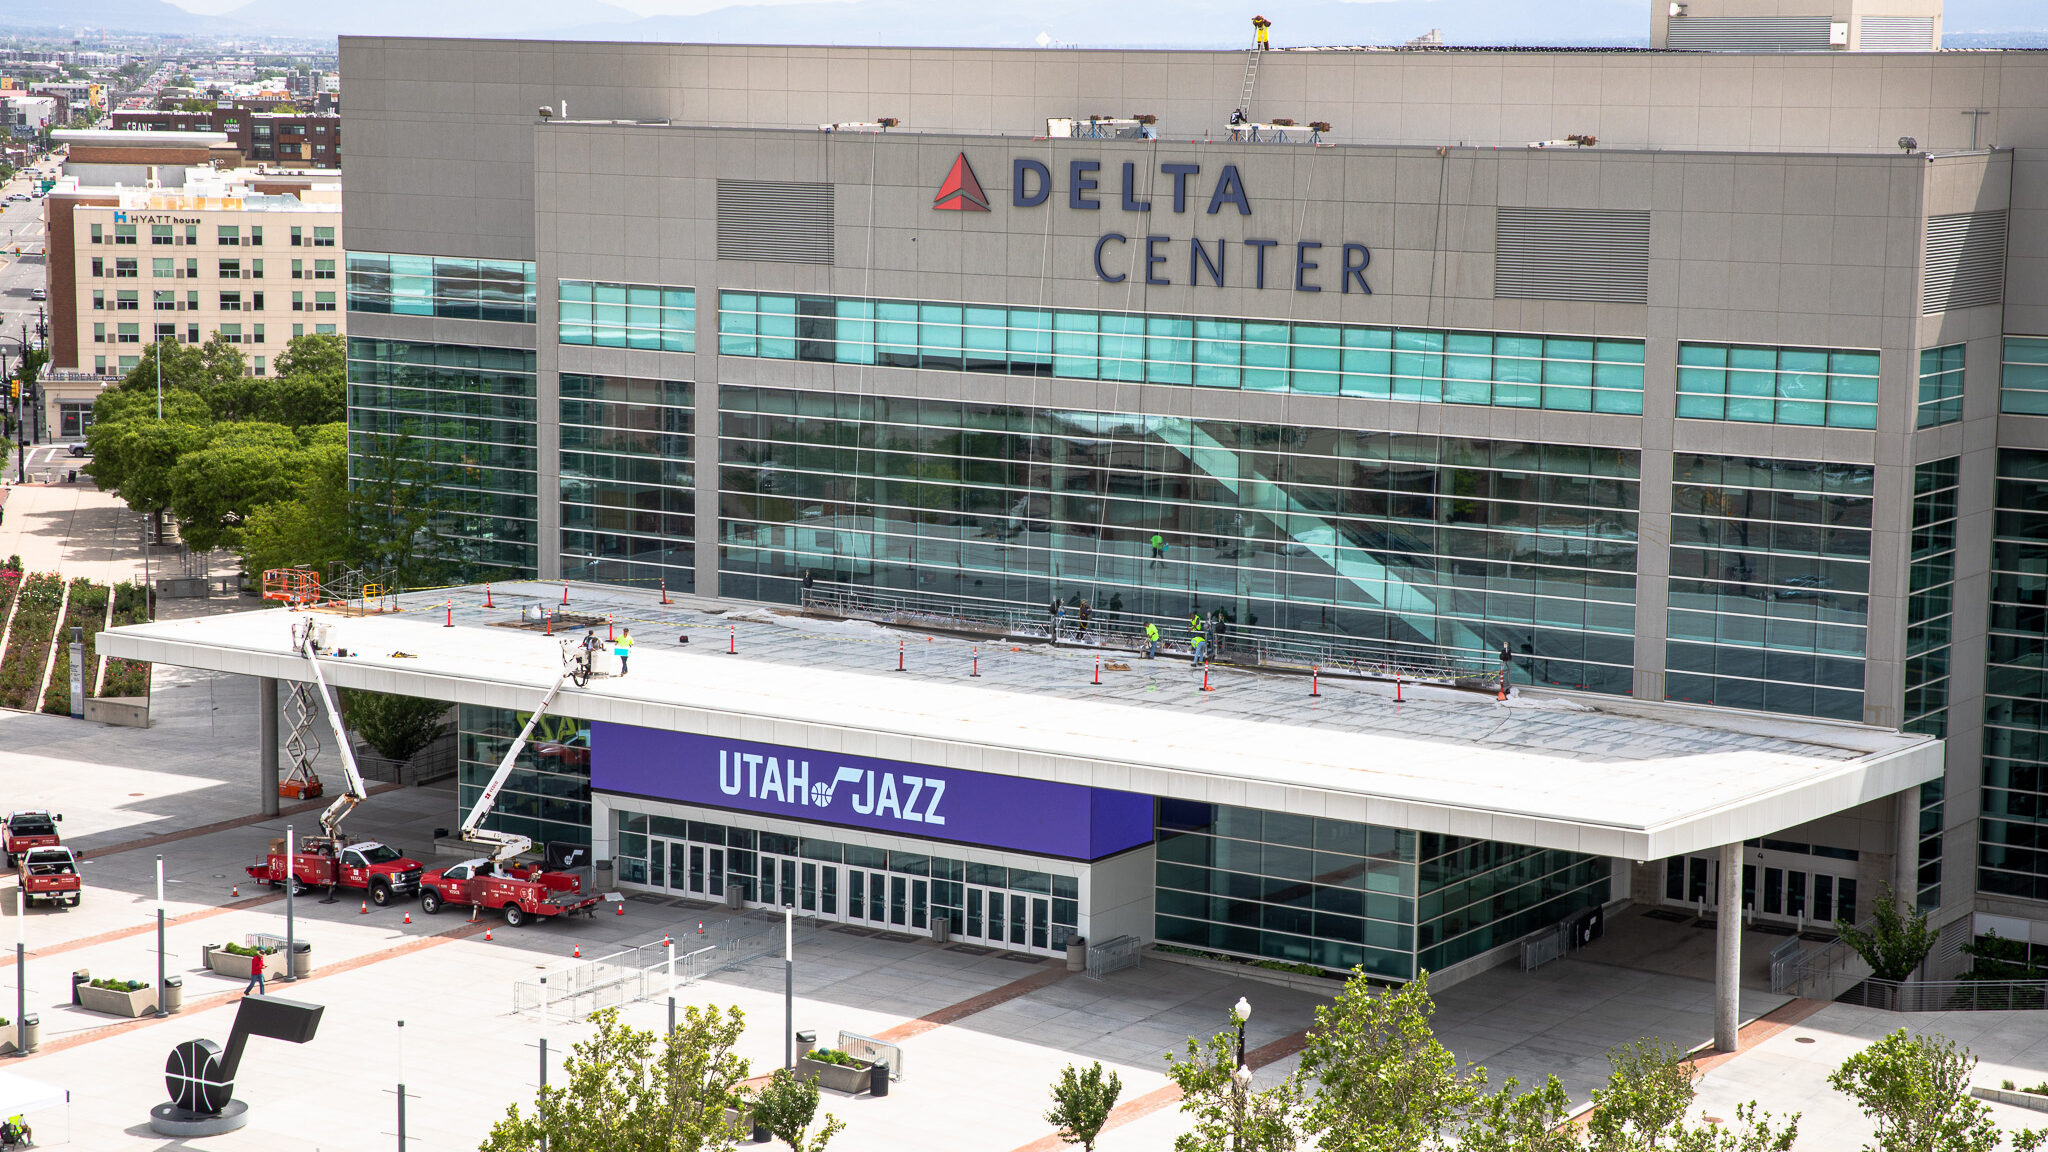 Crews finish placing the Delta Center name on the former Vivint Arena in Salt Lake City, on May 25,...